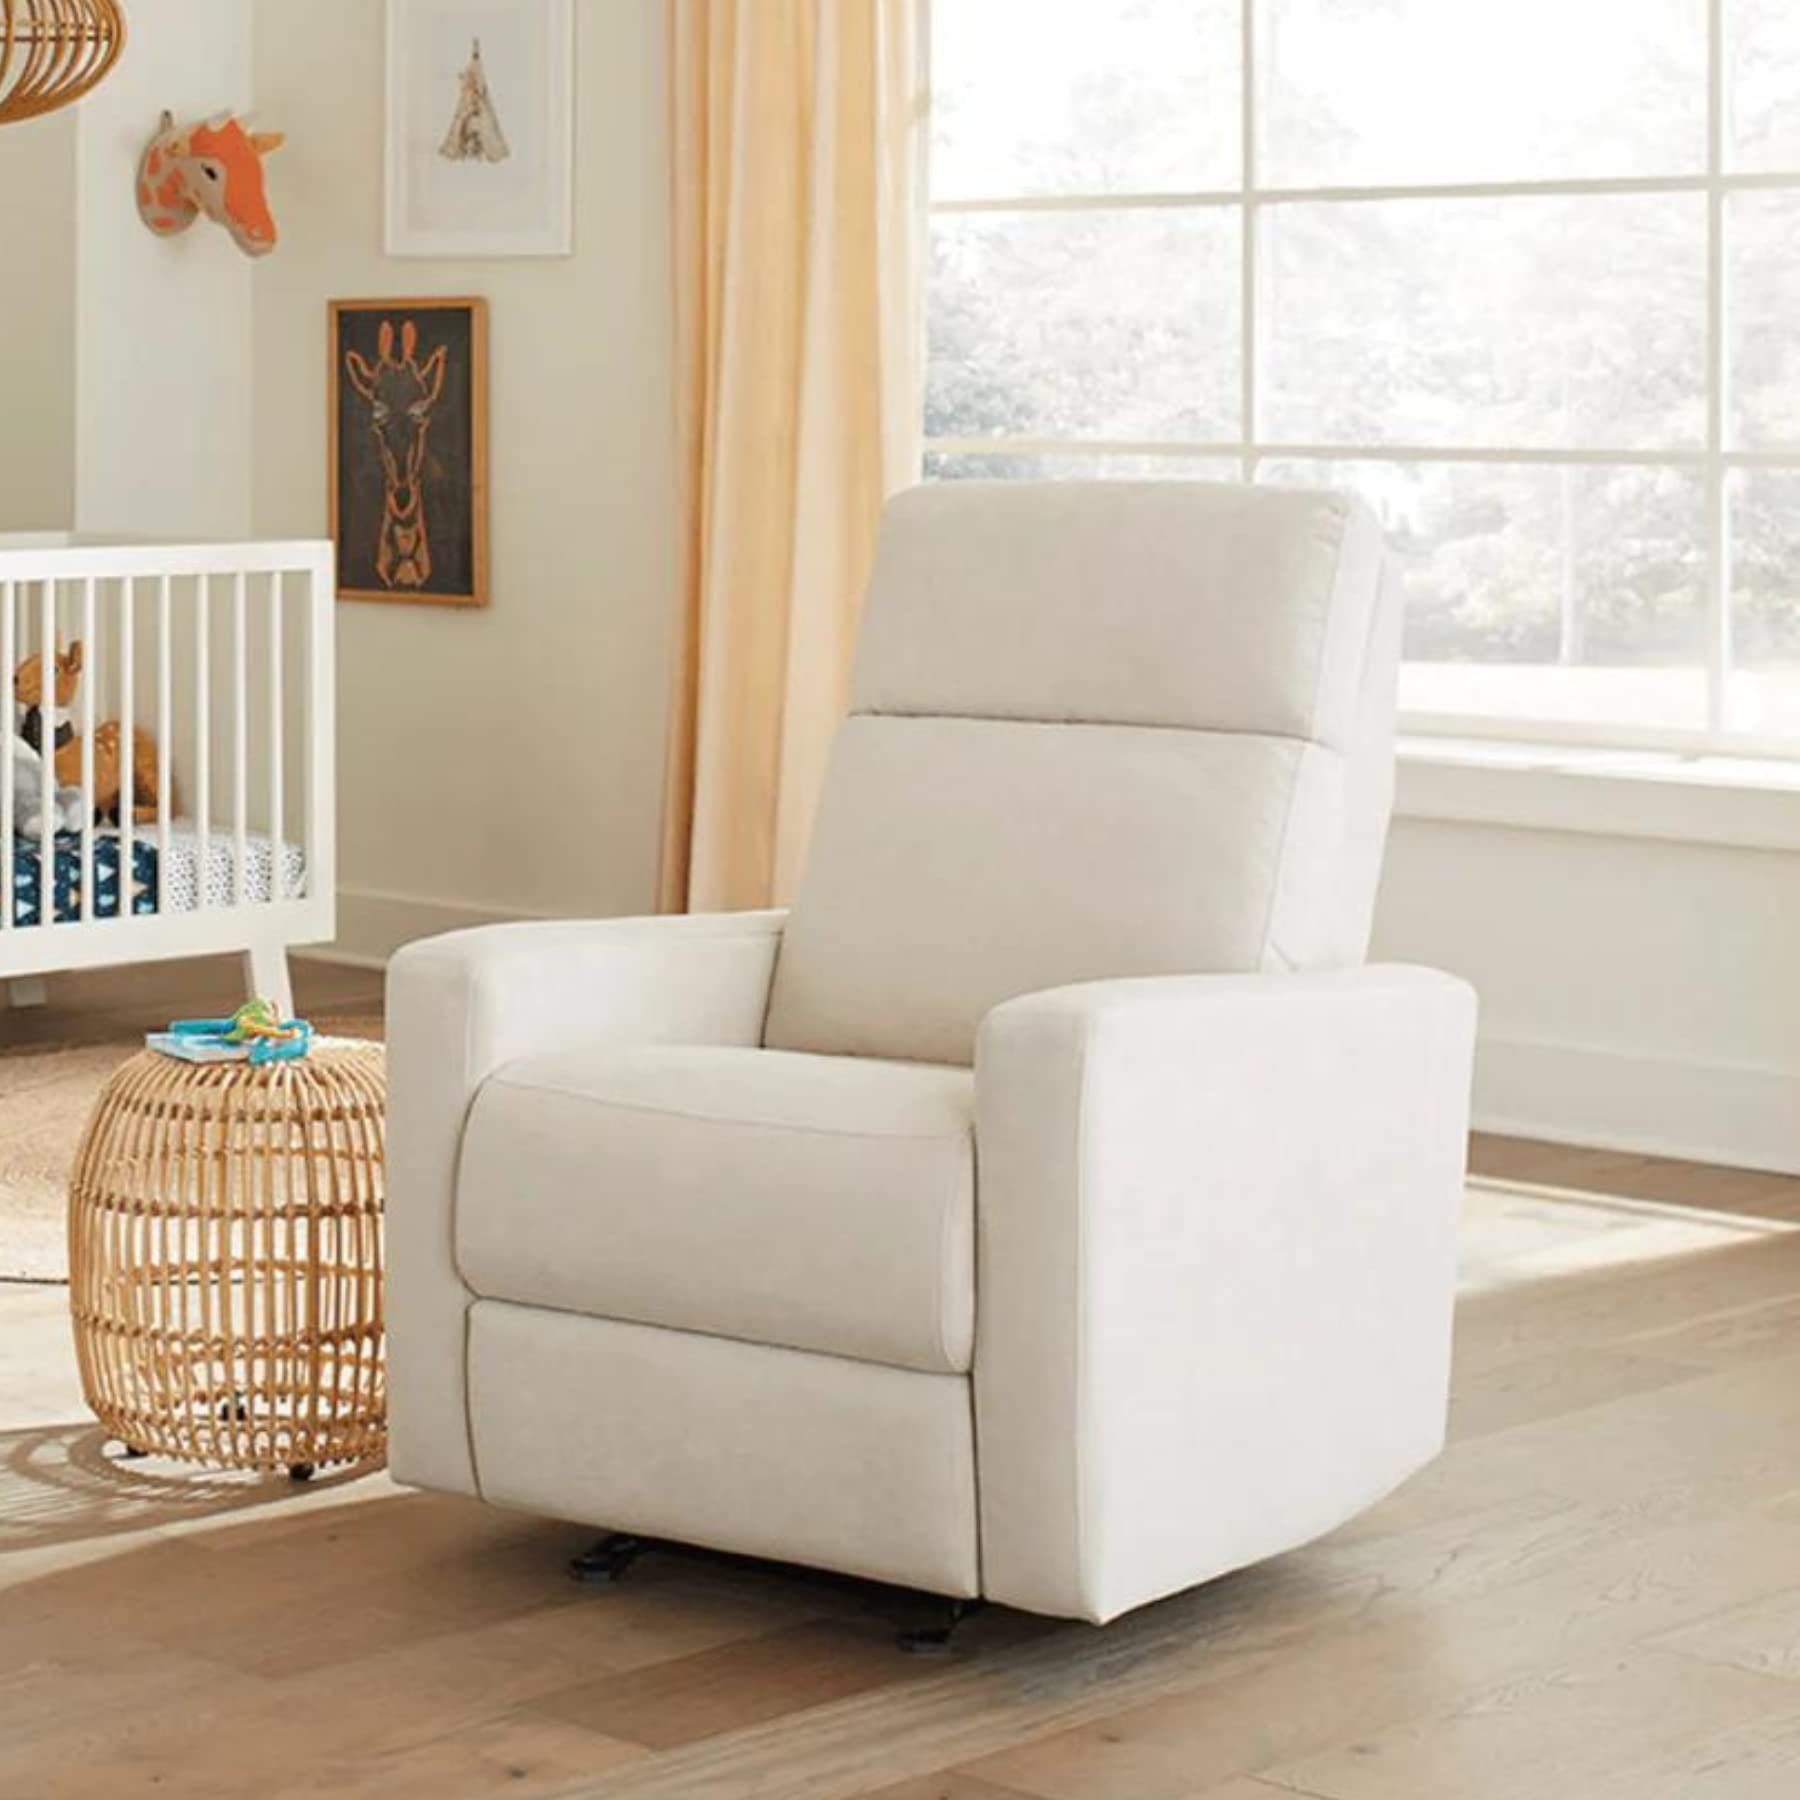 Nurture& The Glider Premium Power Recliner Nursery Glider Chair with Adjustable Head Support | Designed with a Thoughtful Combination of Function and Comfort | Built-in USB Charger (Ivory)